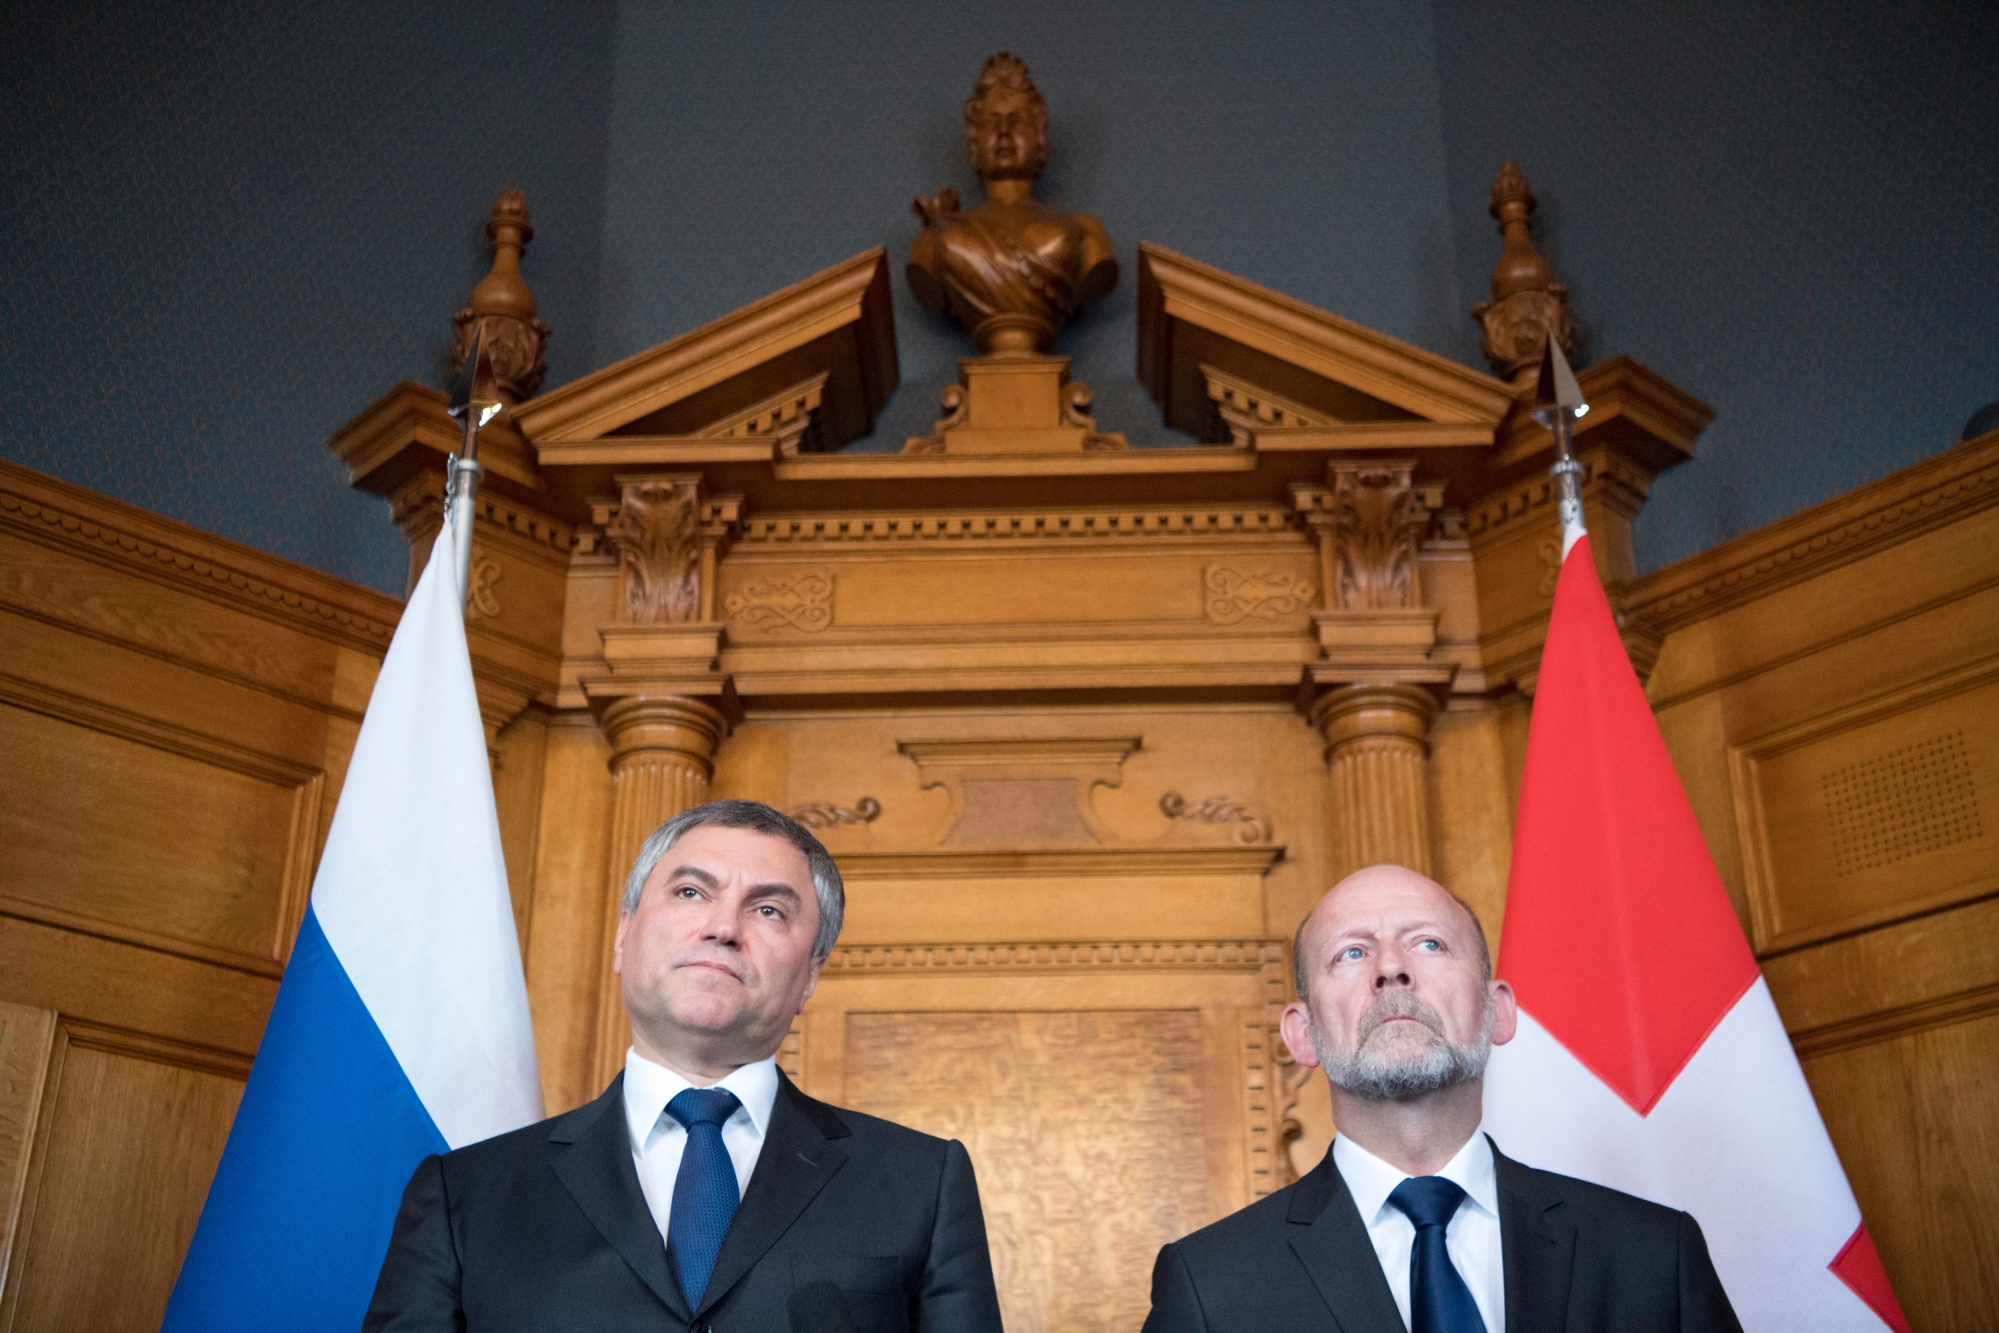 The Russian State Duma Speaker Vyacheslav Volodin, left, and the Swiss President of the National Council Dominique De Buman, right, are pictured at a press conference during a official visit at the Swiss Parliament, in Bern, Switzerland, this Monday, February 19, 2018. (KEYSTONE/Anthony Anex) SWITZERLAND VISIT OF DUMA PRESIDENT